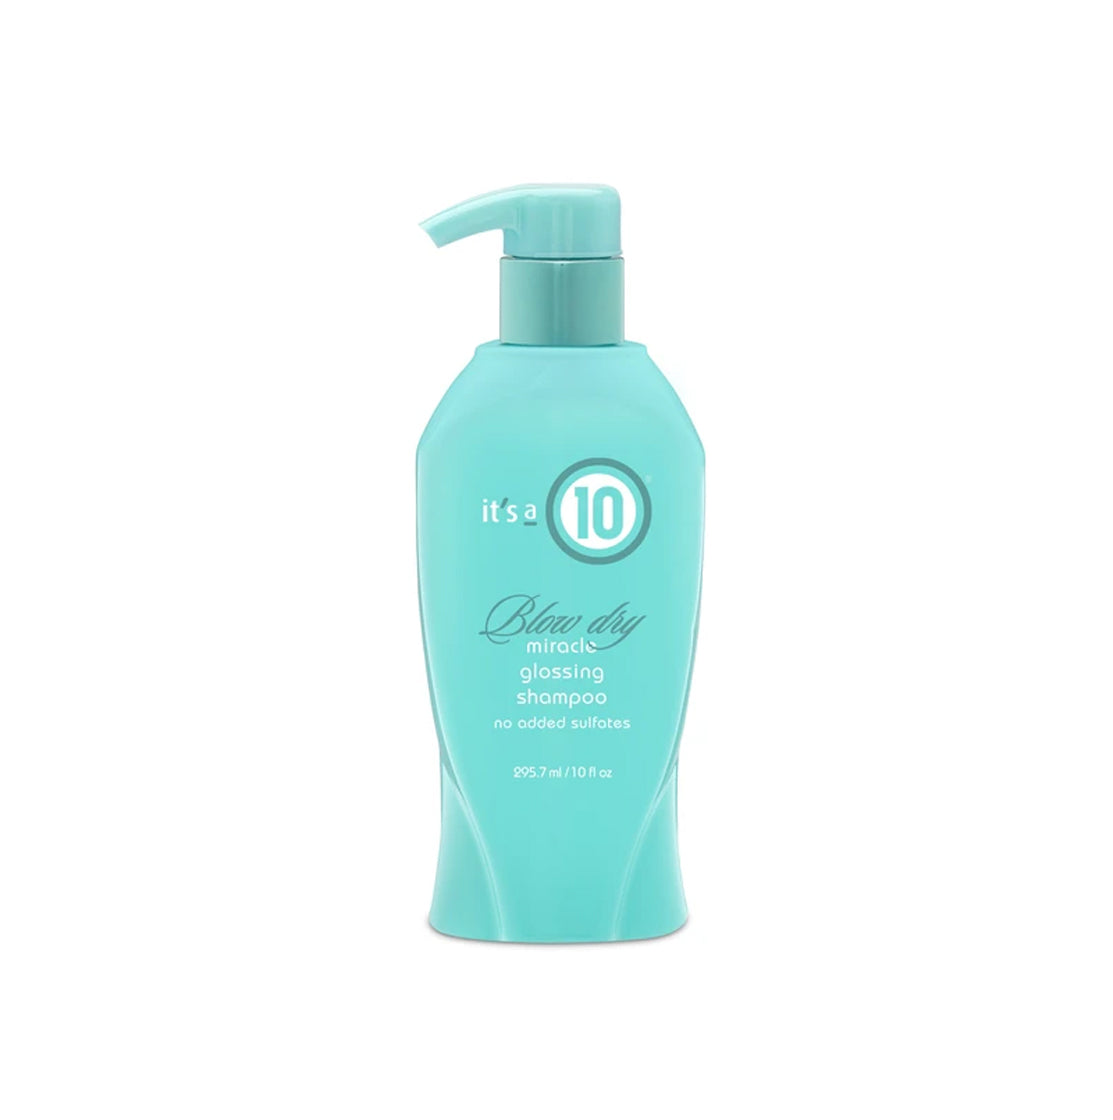 It's A 10 Blow Dry Miracle Glossing Shampoo 10oz / 295.7ml